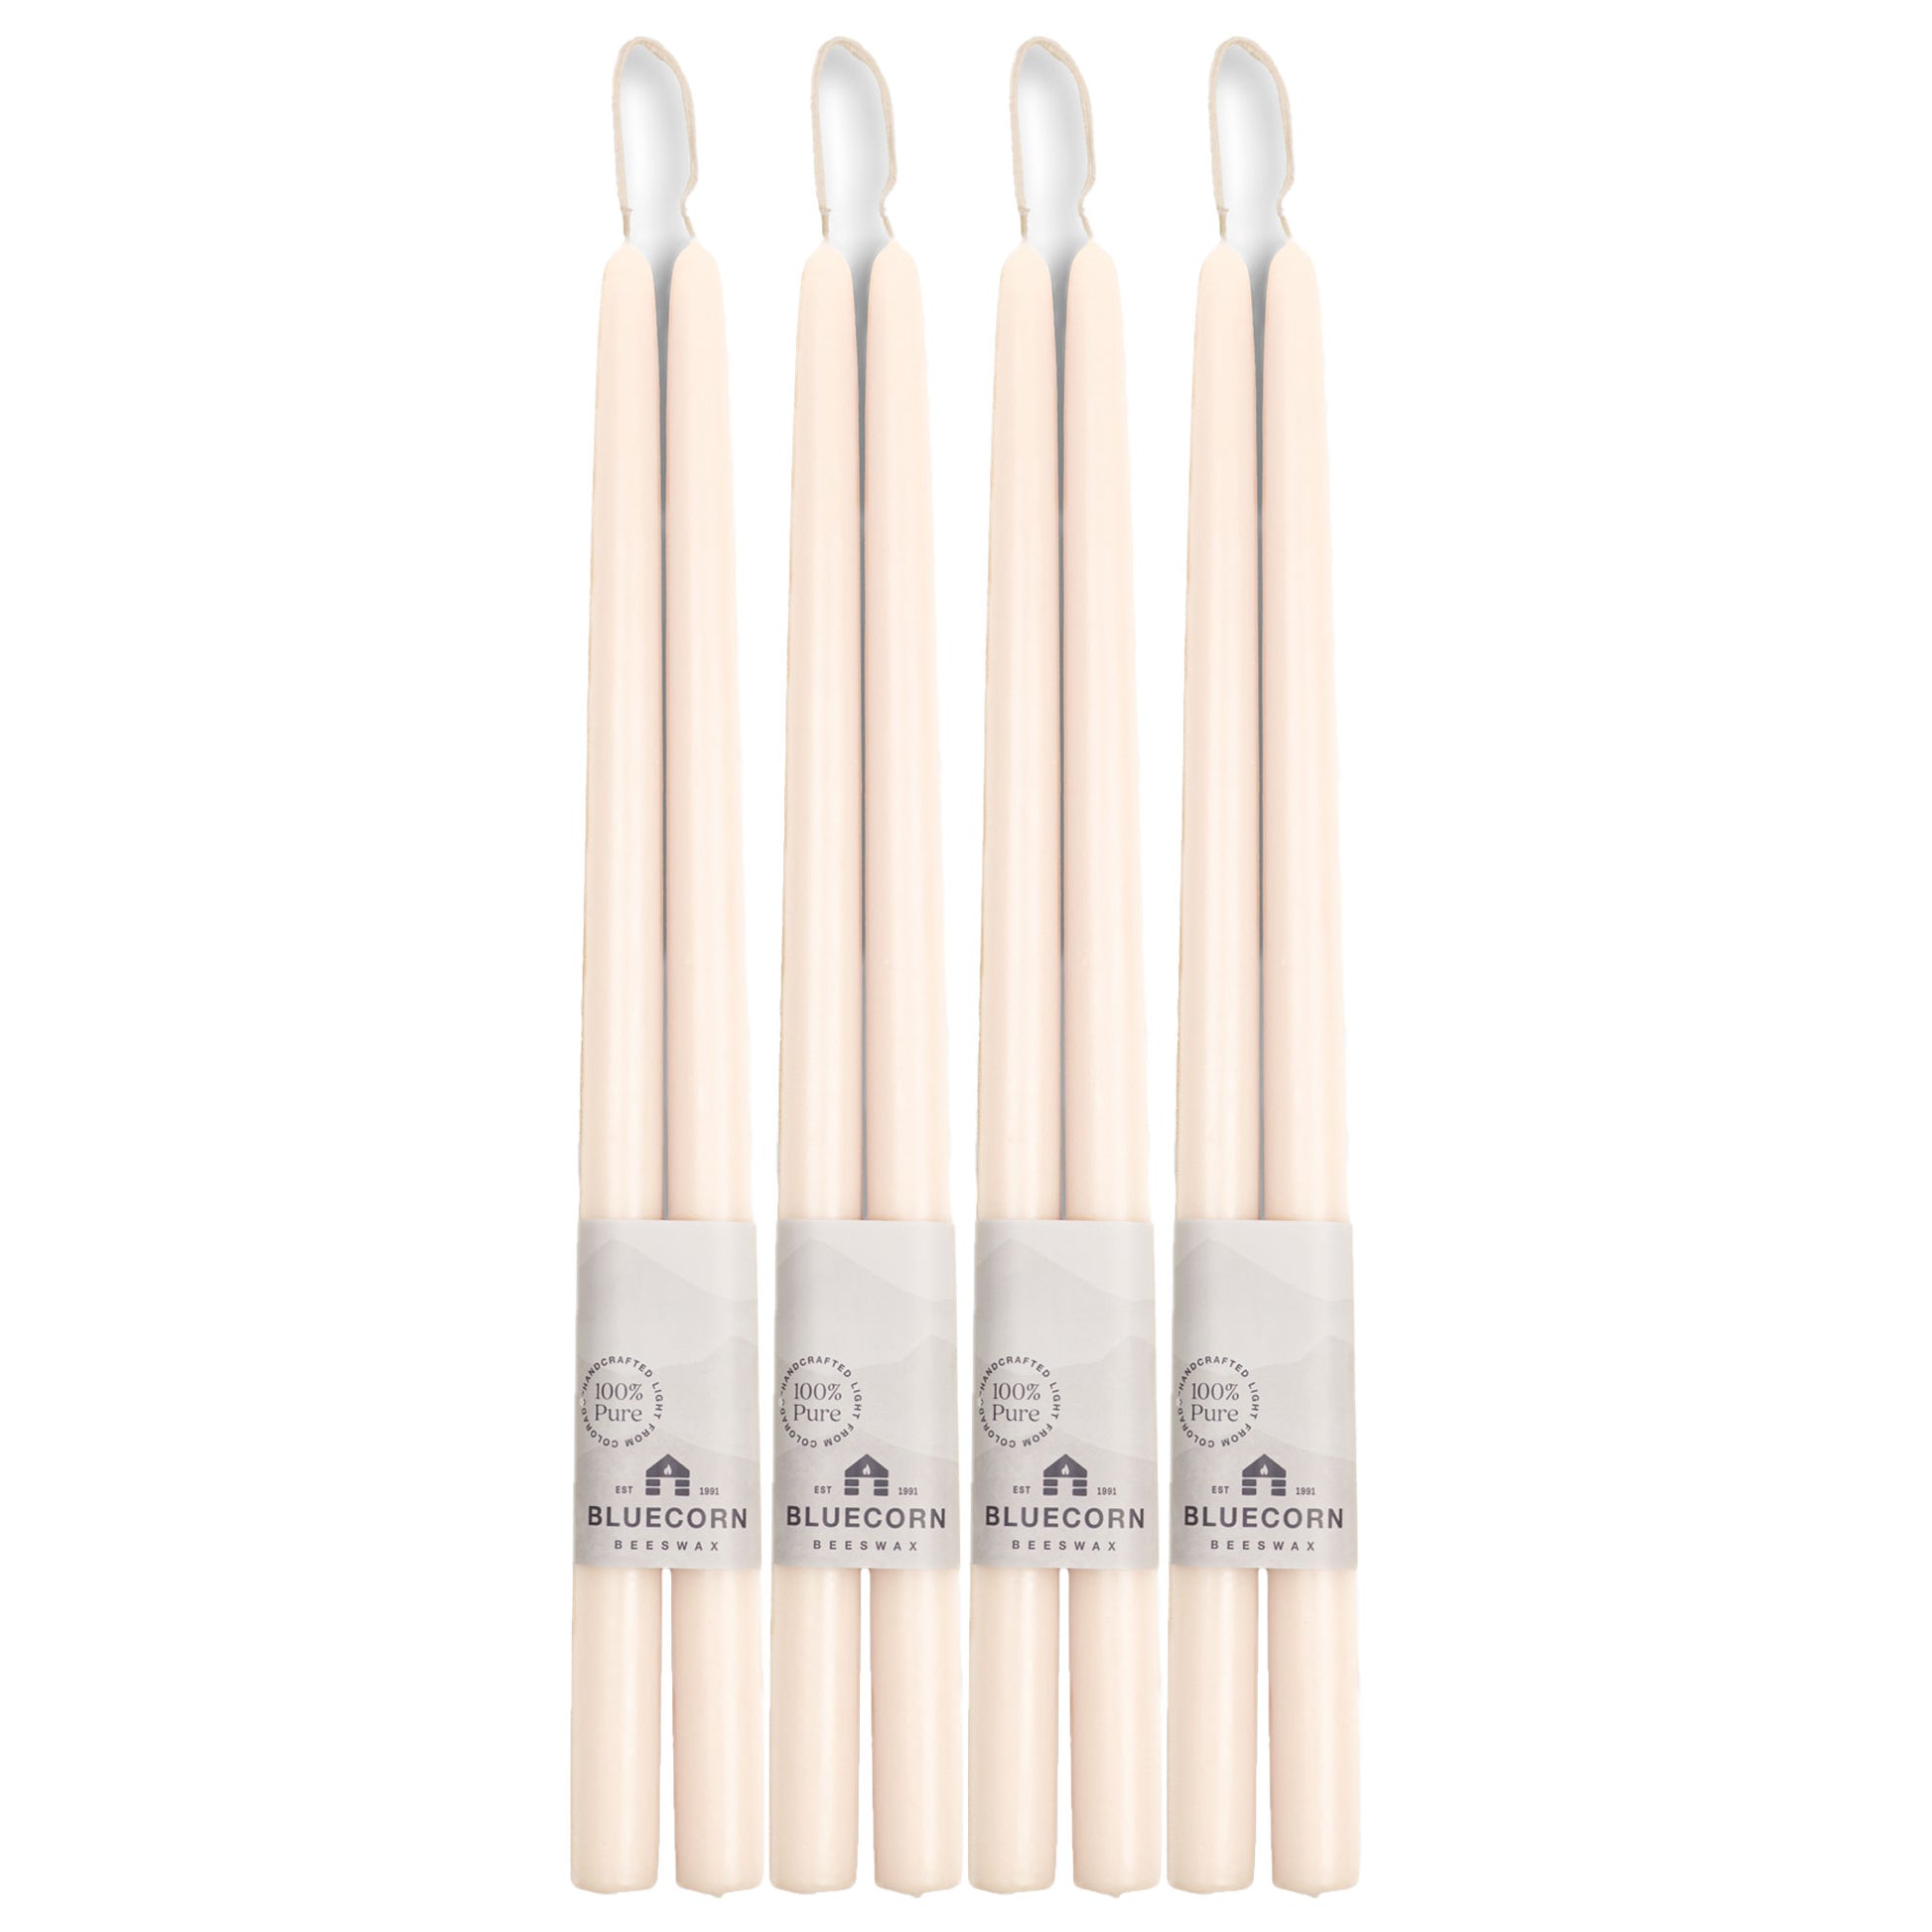 ivory white taper candles pure beeswax candles white beeswax candles bluecorn candles